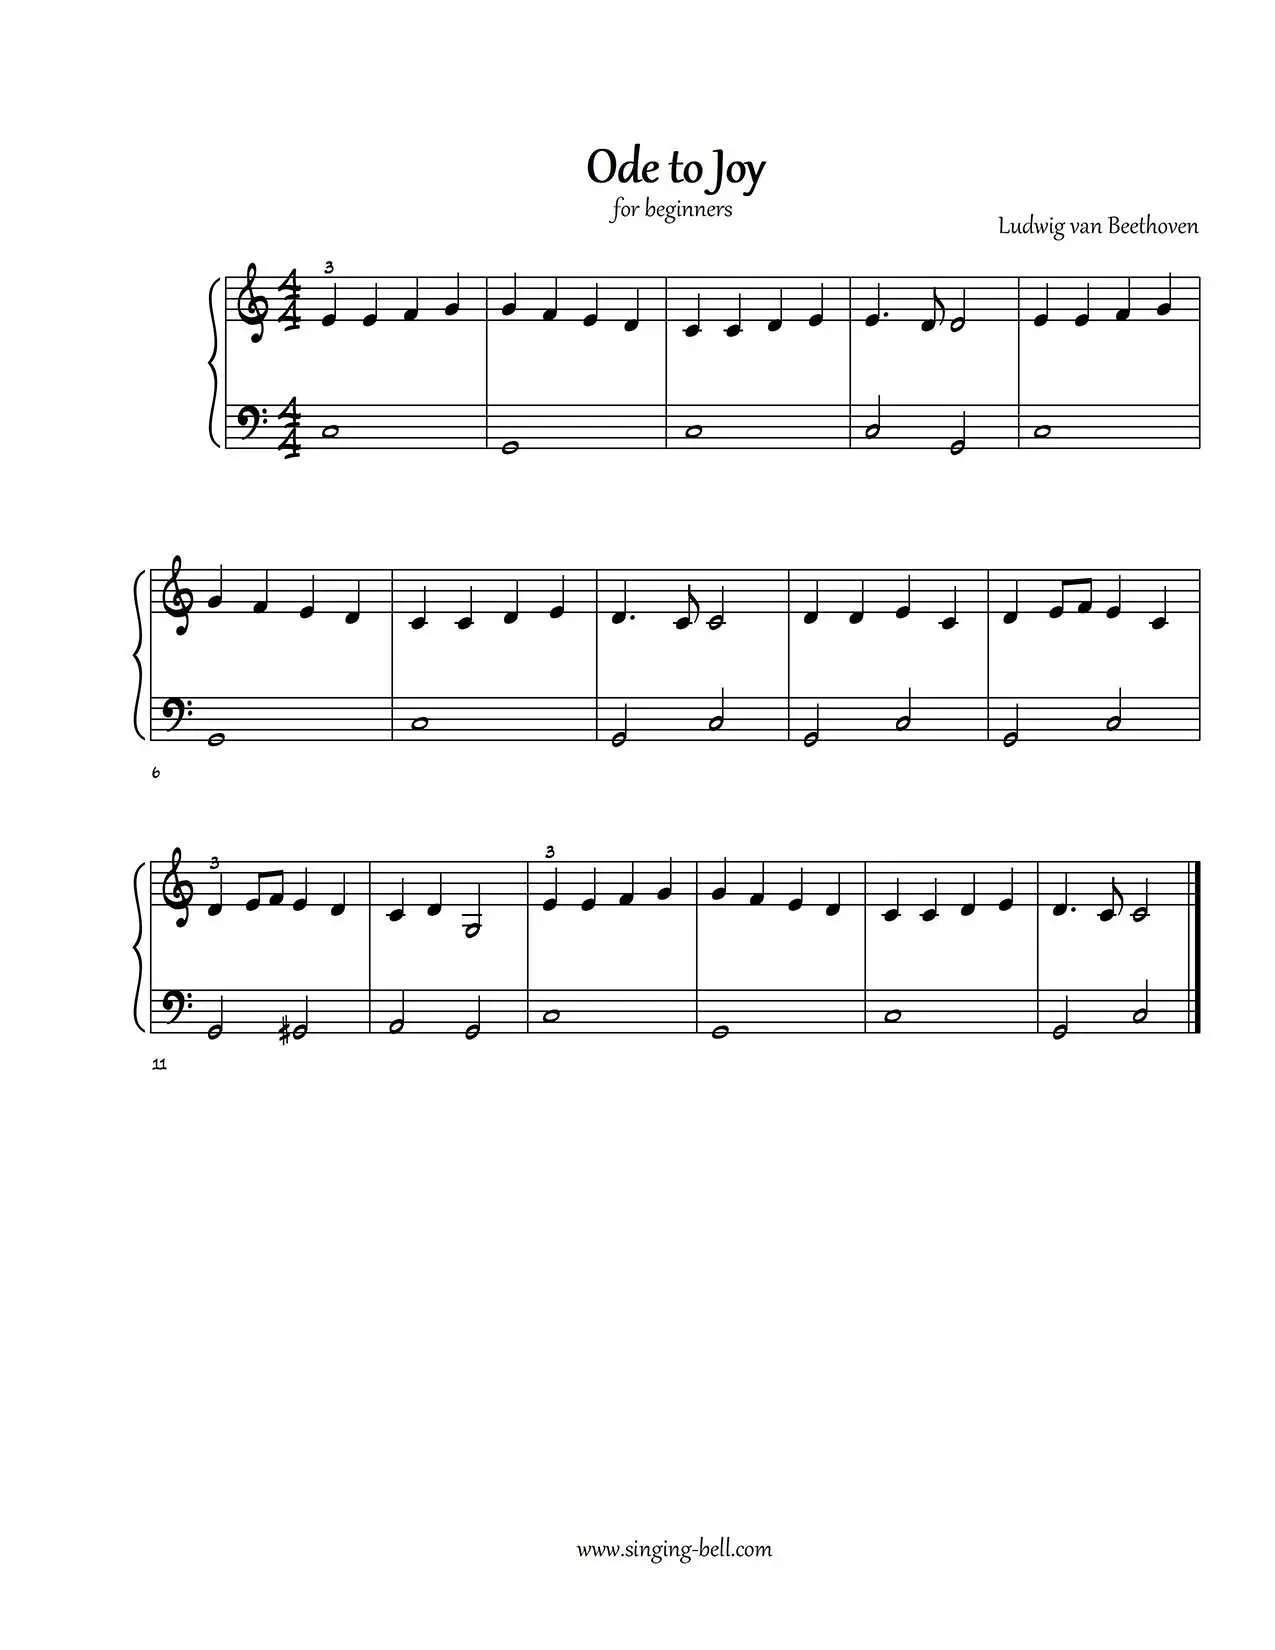 Ode to Joy easy piano sheet music notes beginners pdf in C